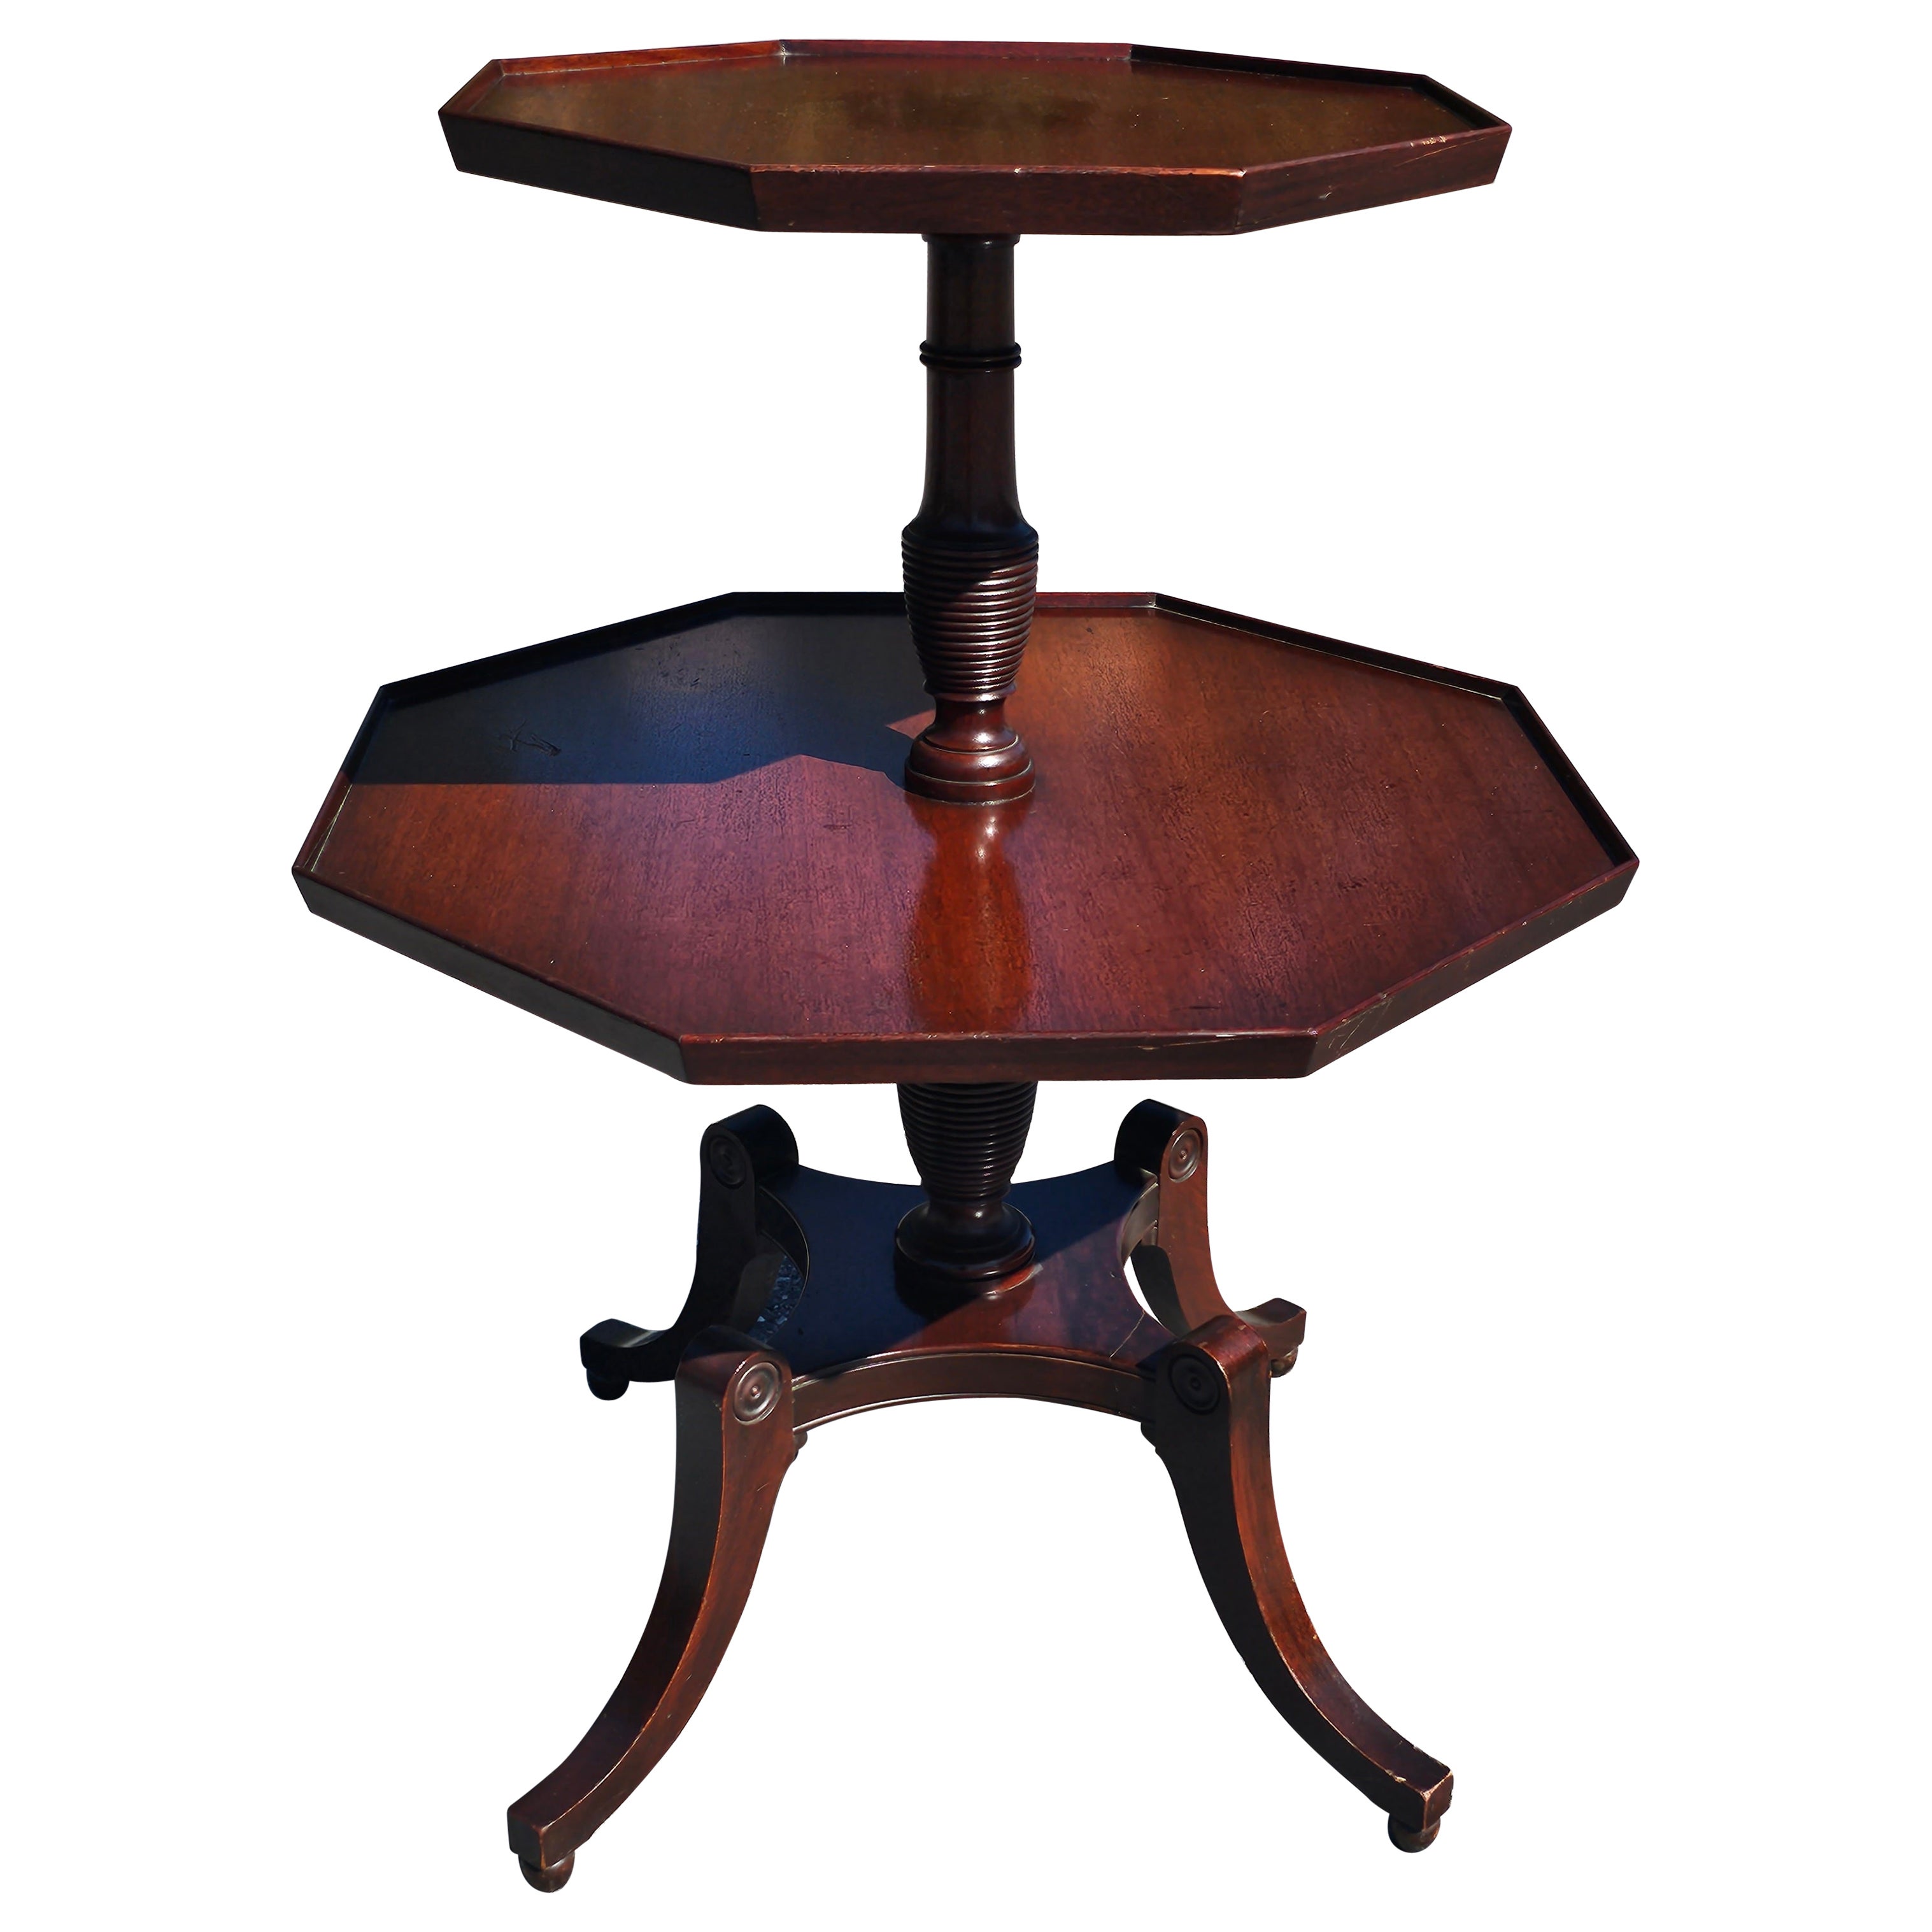 19th Century Mahogany Pedestal Two-Tier Octogonal Dumbwaiter Table For Sale